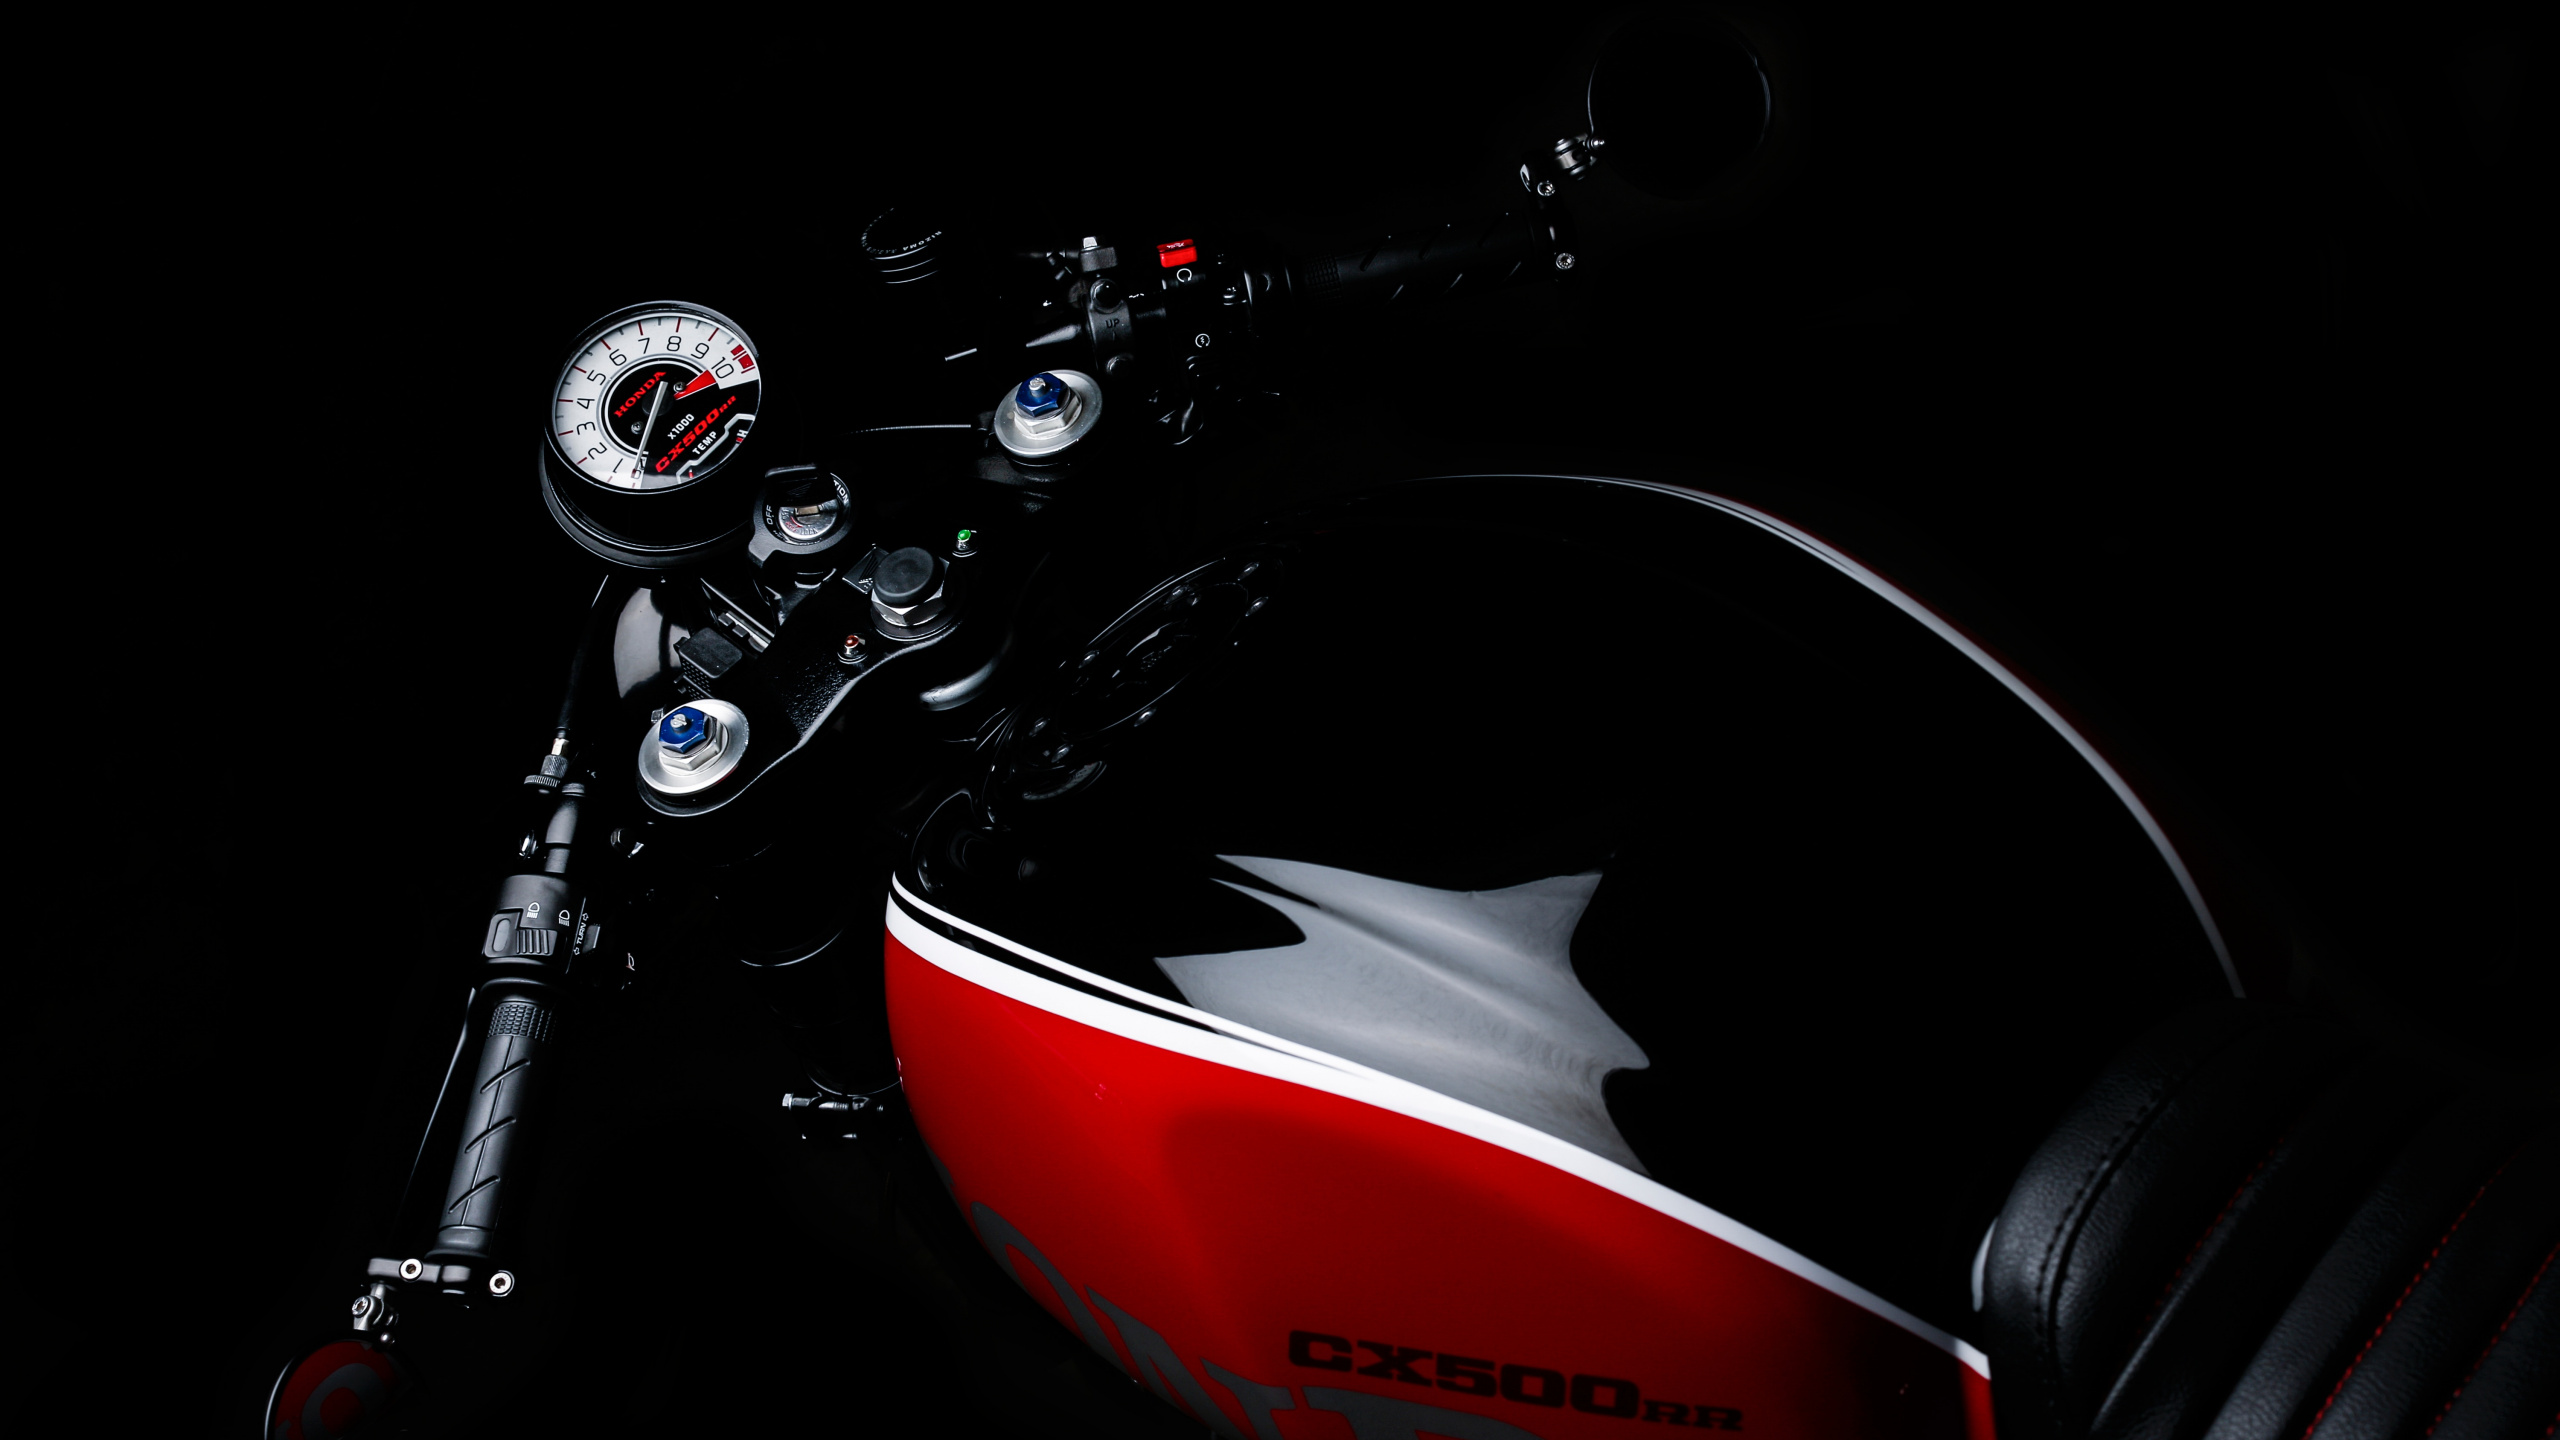 Red and Black Honda Motorcycle. Wallpaper in 2560x1440 Resolution